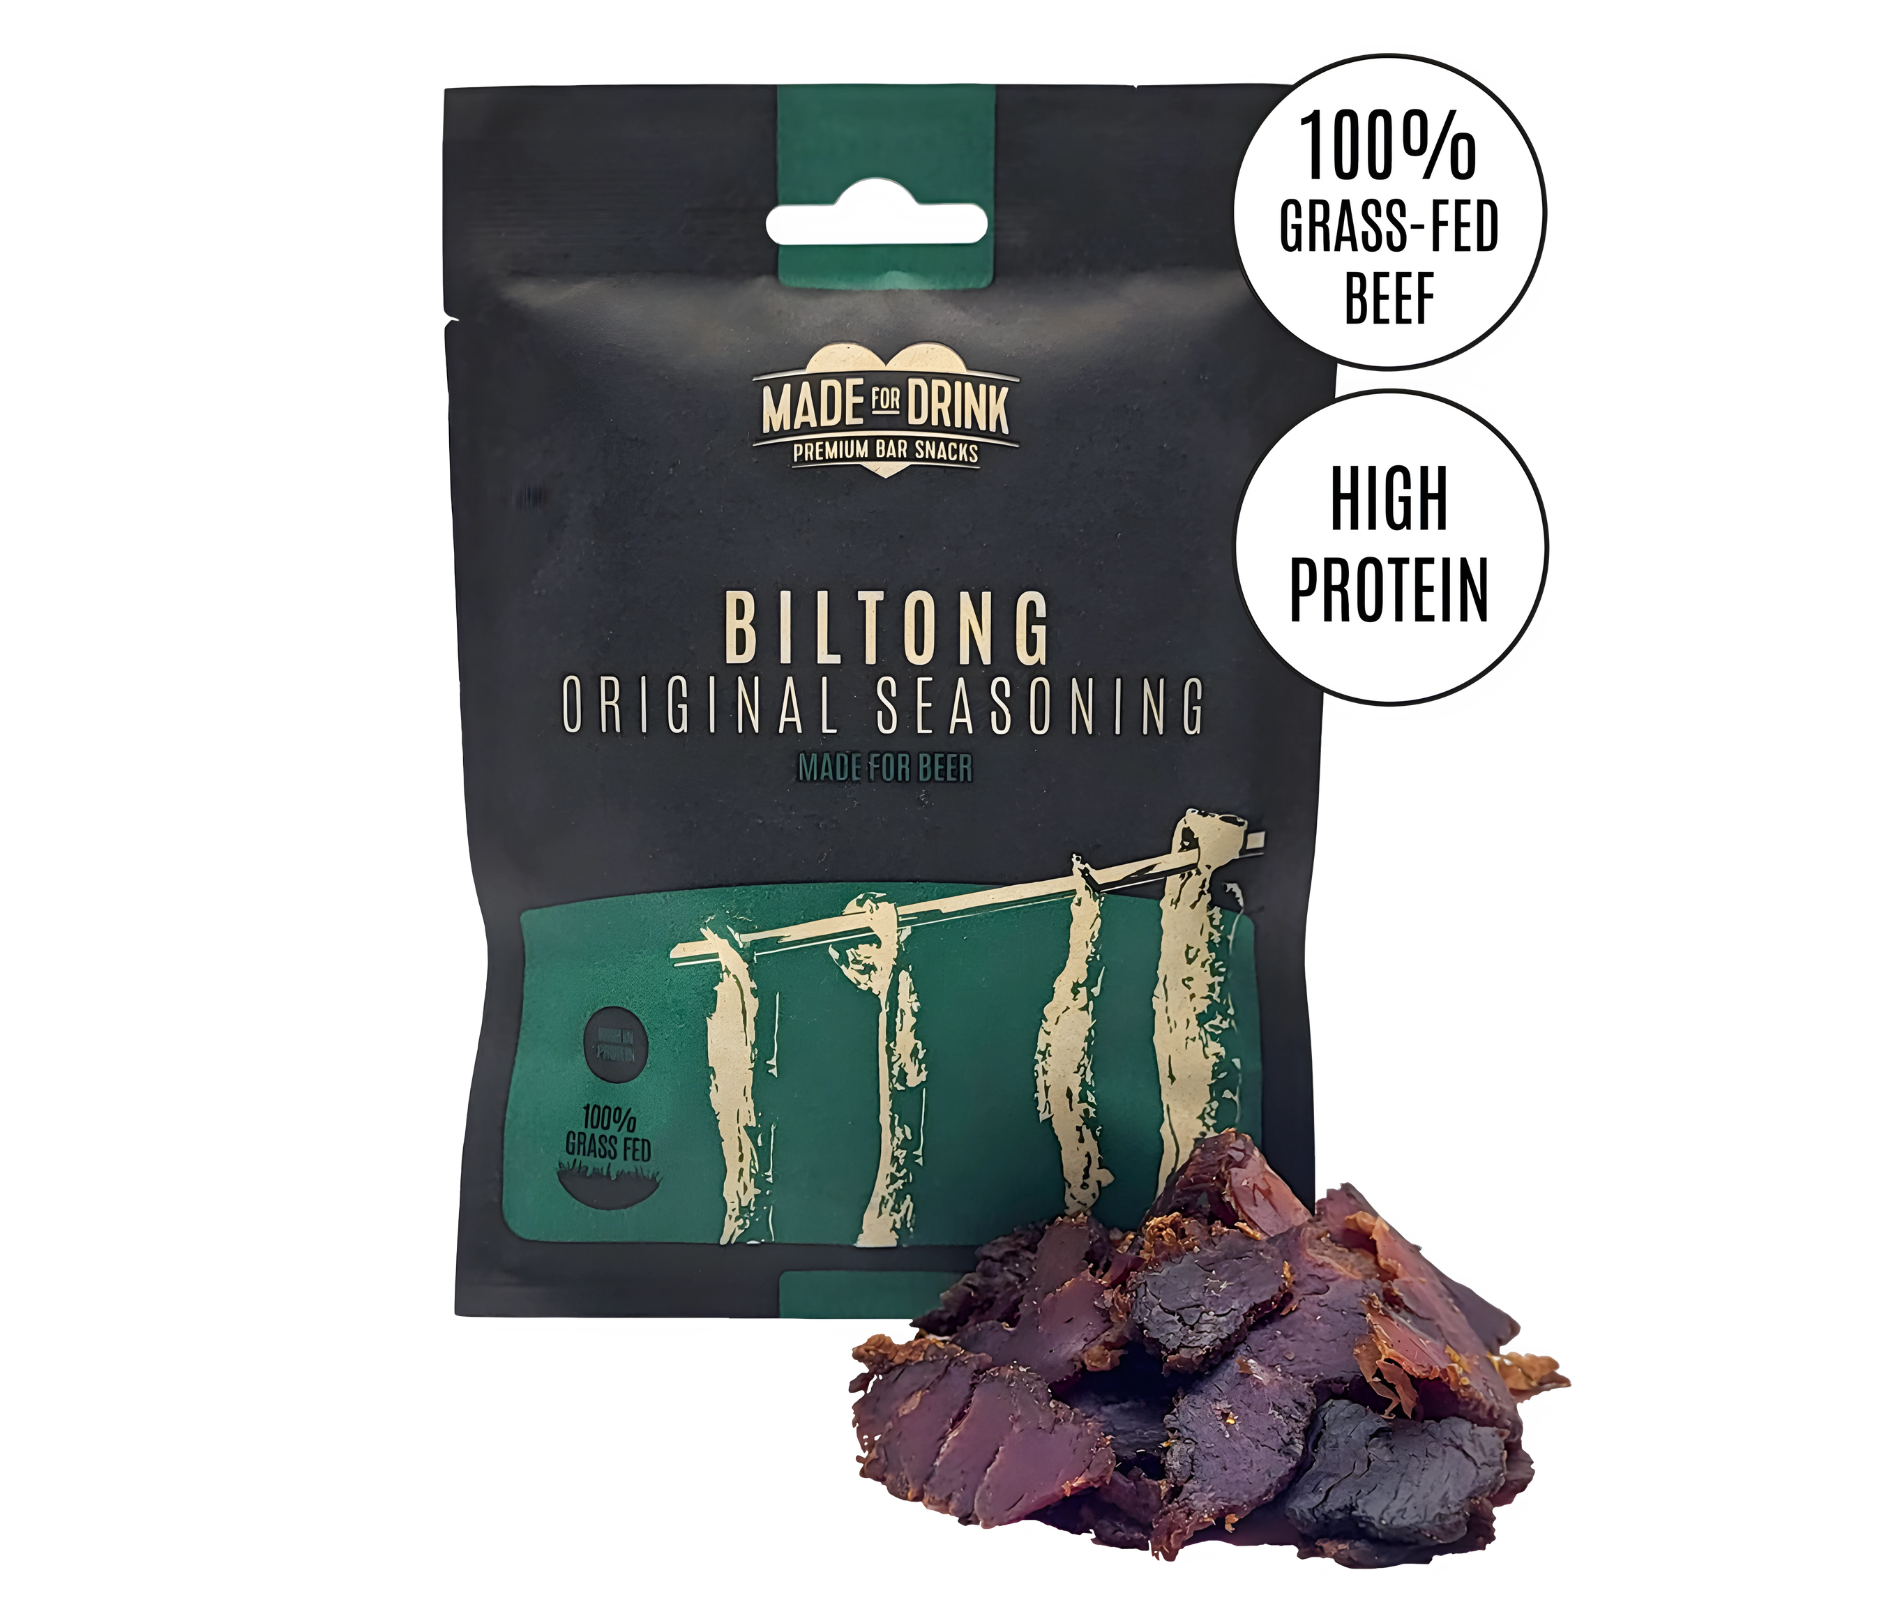 A 30g packet of Made For Drink's 100% grass-fed Irish beef biltong in original seasoning, with some strips of beef dark and rich biltong piled up in front. High in protein.